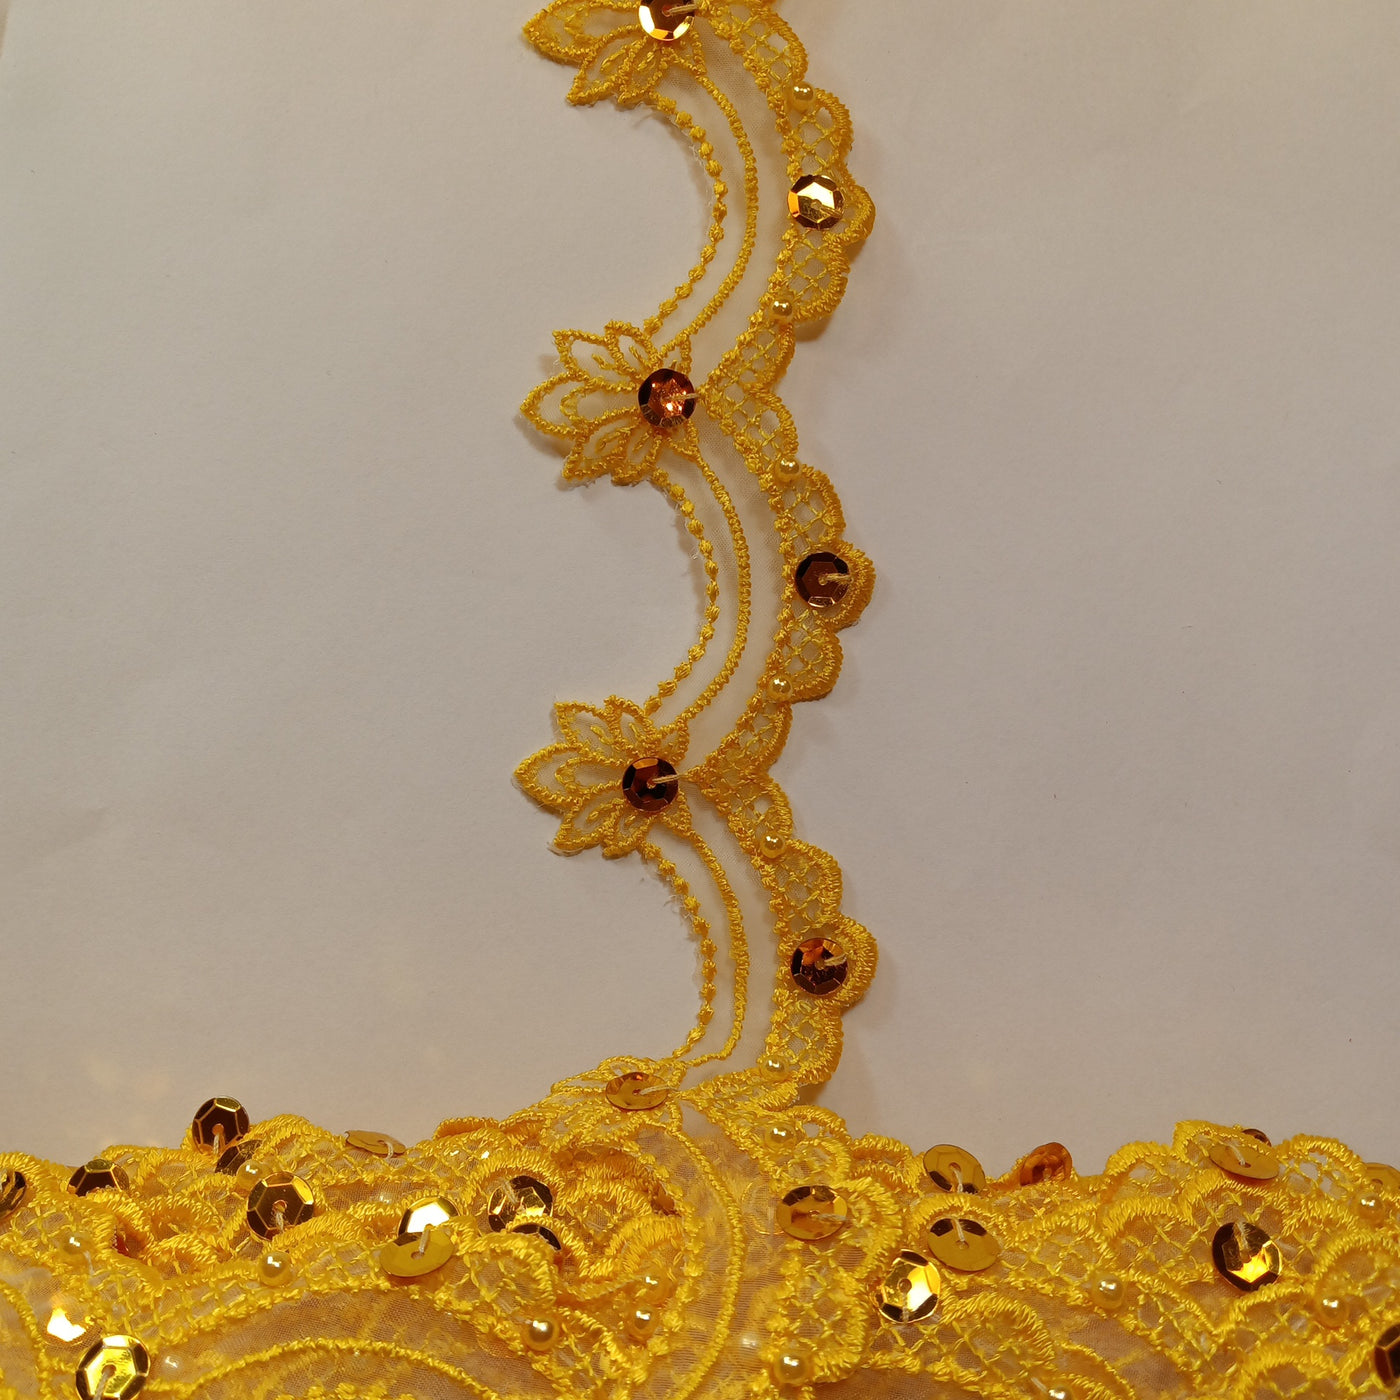 Beaded Yellow Lace Trim Embroidered on 100% Polyester Organza . Large Arch Scalloped Trim. Formal Trim. Perfect for Edging and Gowns.  Sold by the Yard.  Lace Usa